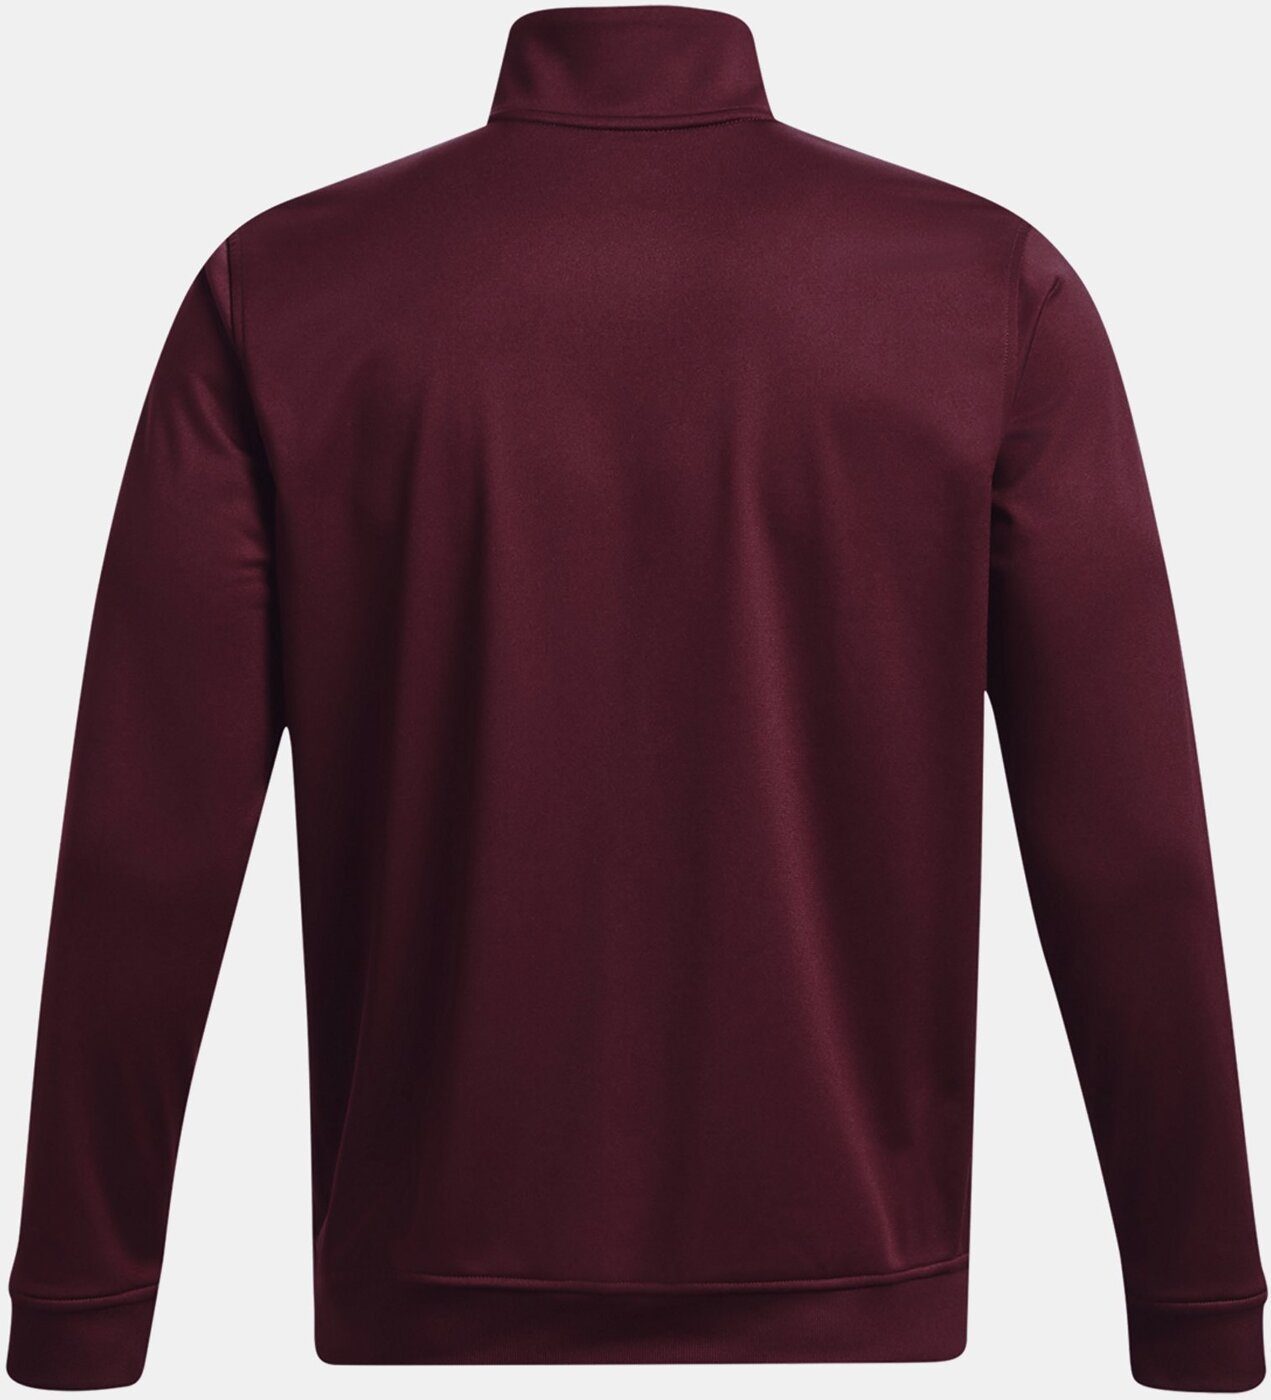 JACKET TRICOT Armour® SPORTSTYLE Bordeaux Rot T-Shirt MAROON Under DARK